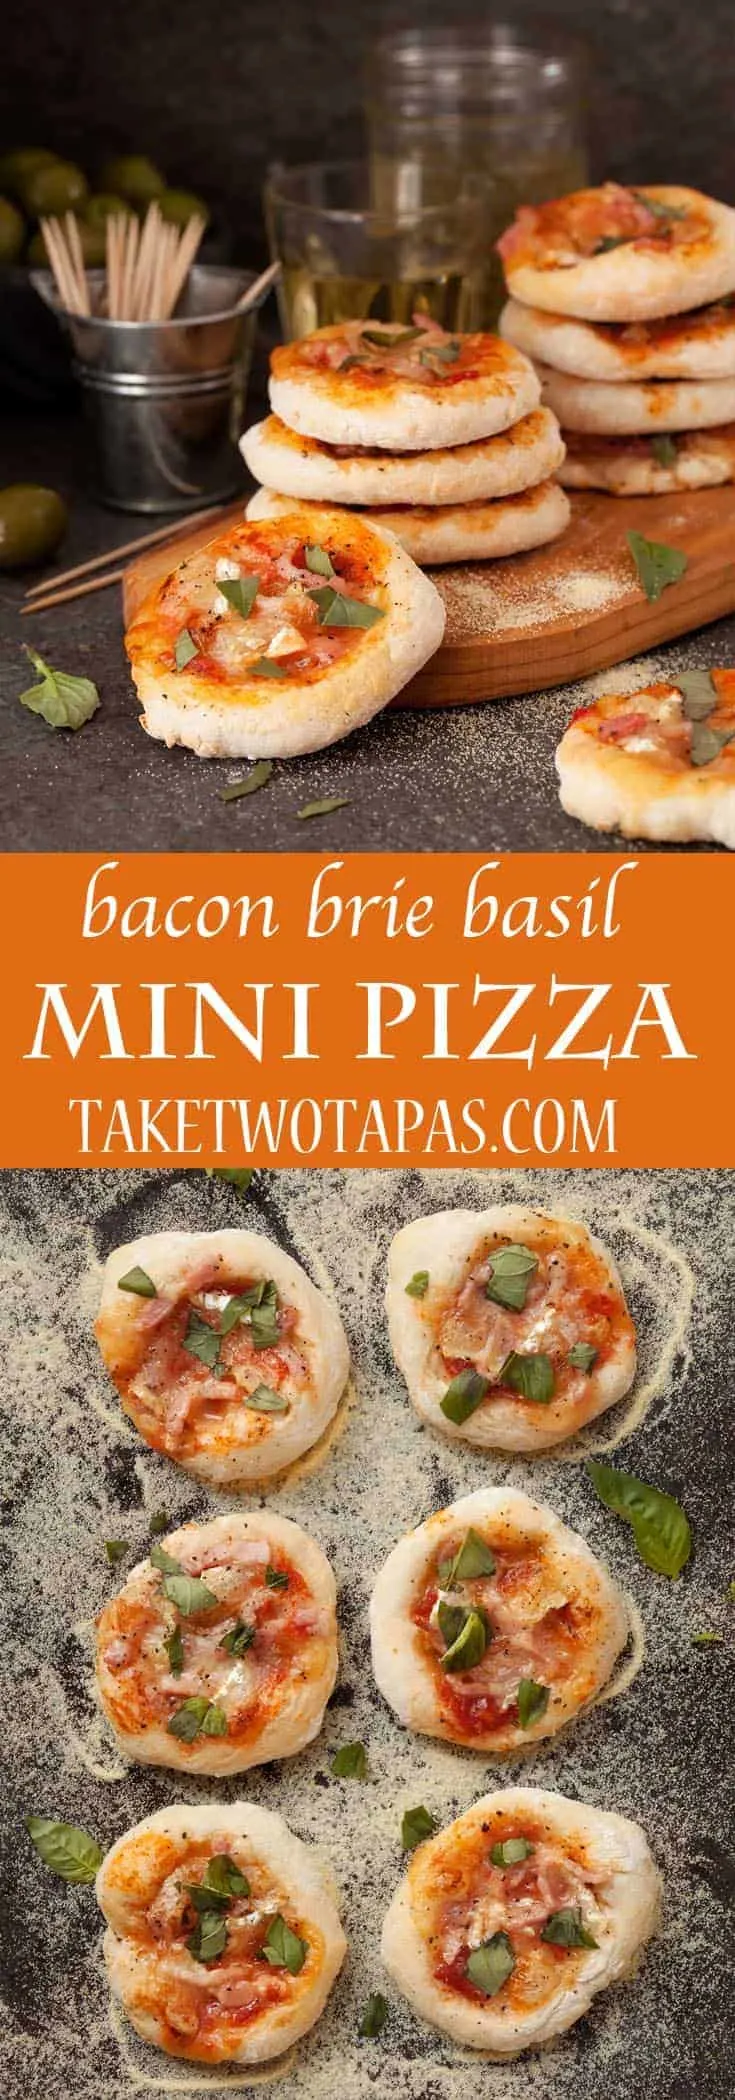 Bacon Brie Basil Bacon Brie Basil Mini Pizzas are a delicious full flavor snack perfect for Game Day! #gameday #appetizer #pizza #fingerfood